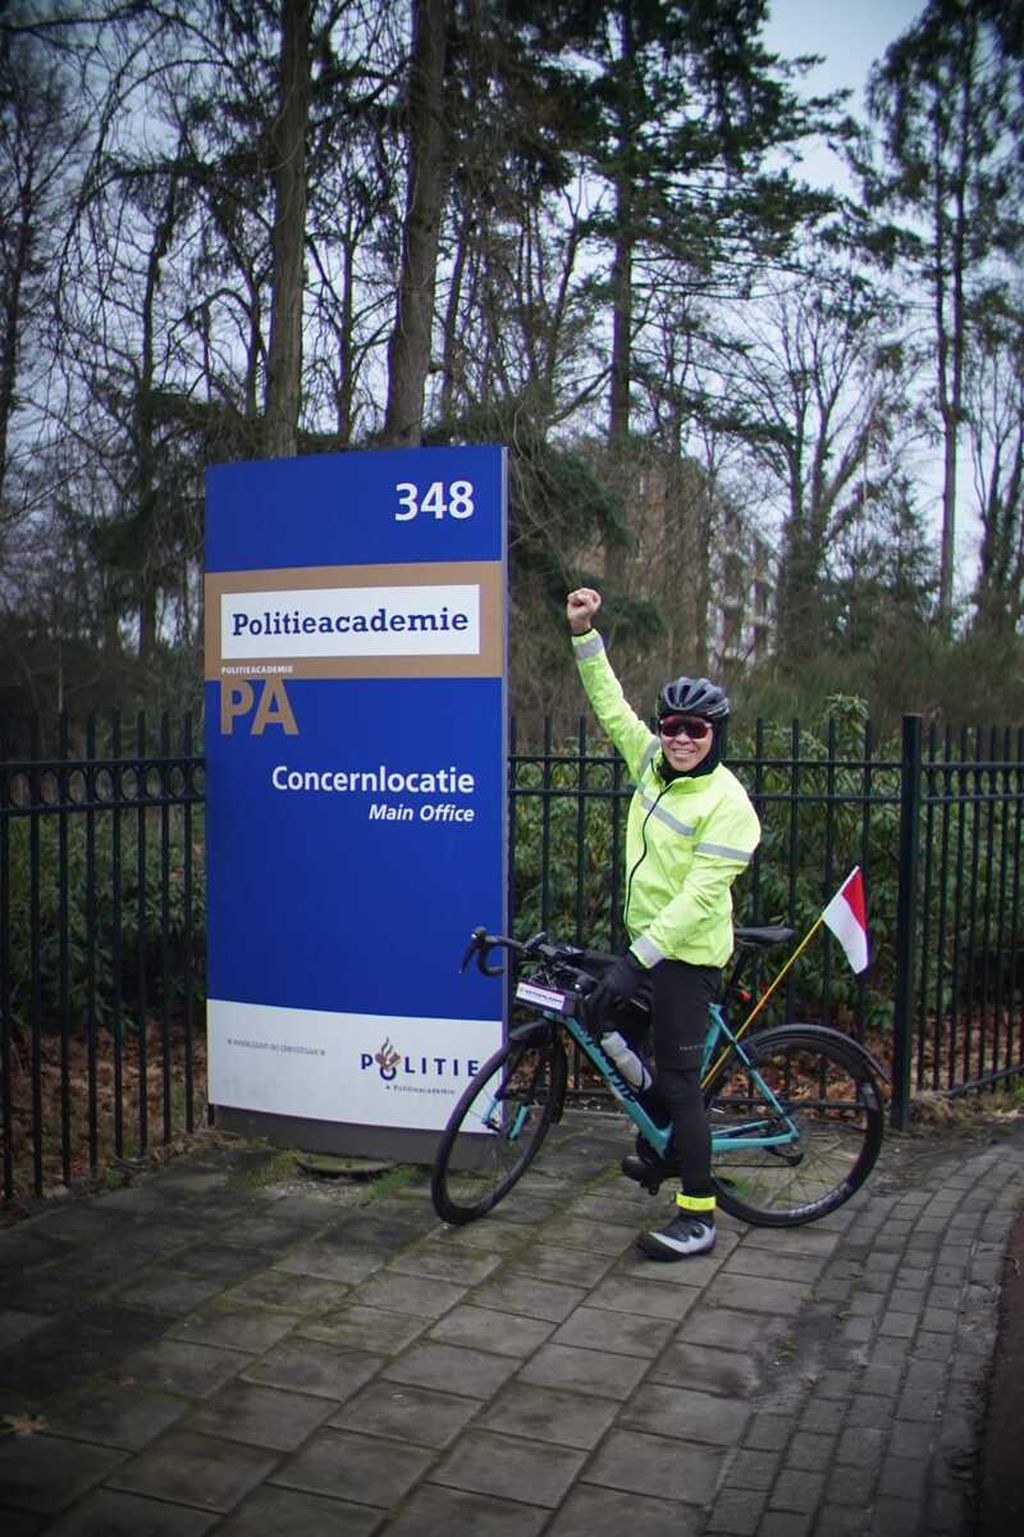 The Police Academy in the city of Apeldoorn. Decades ago, this school became a place of education for a number of Indonesian police officers to become traffic police officers.